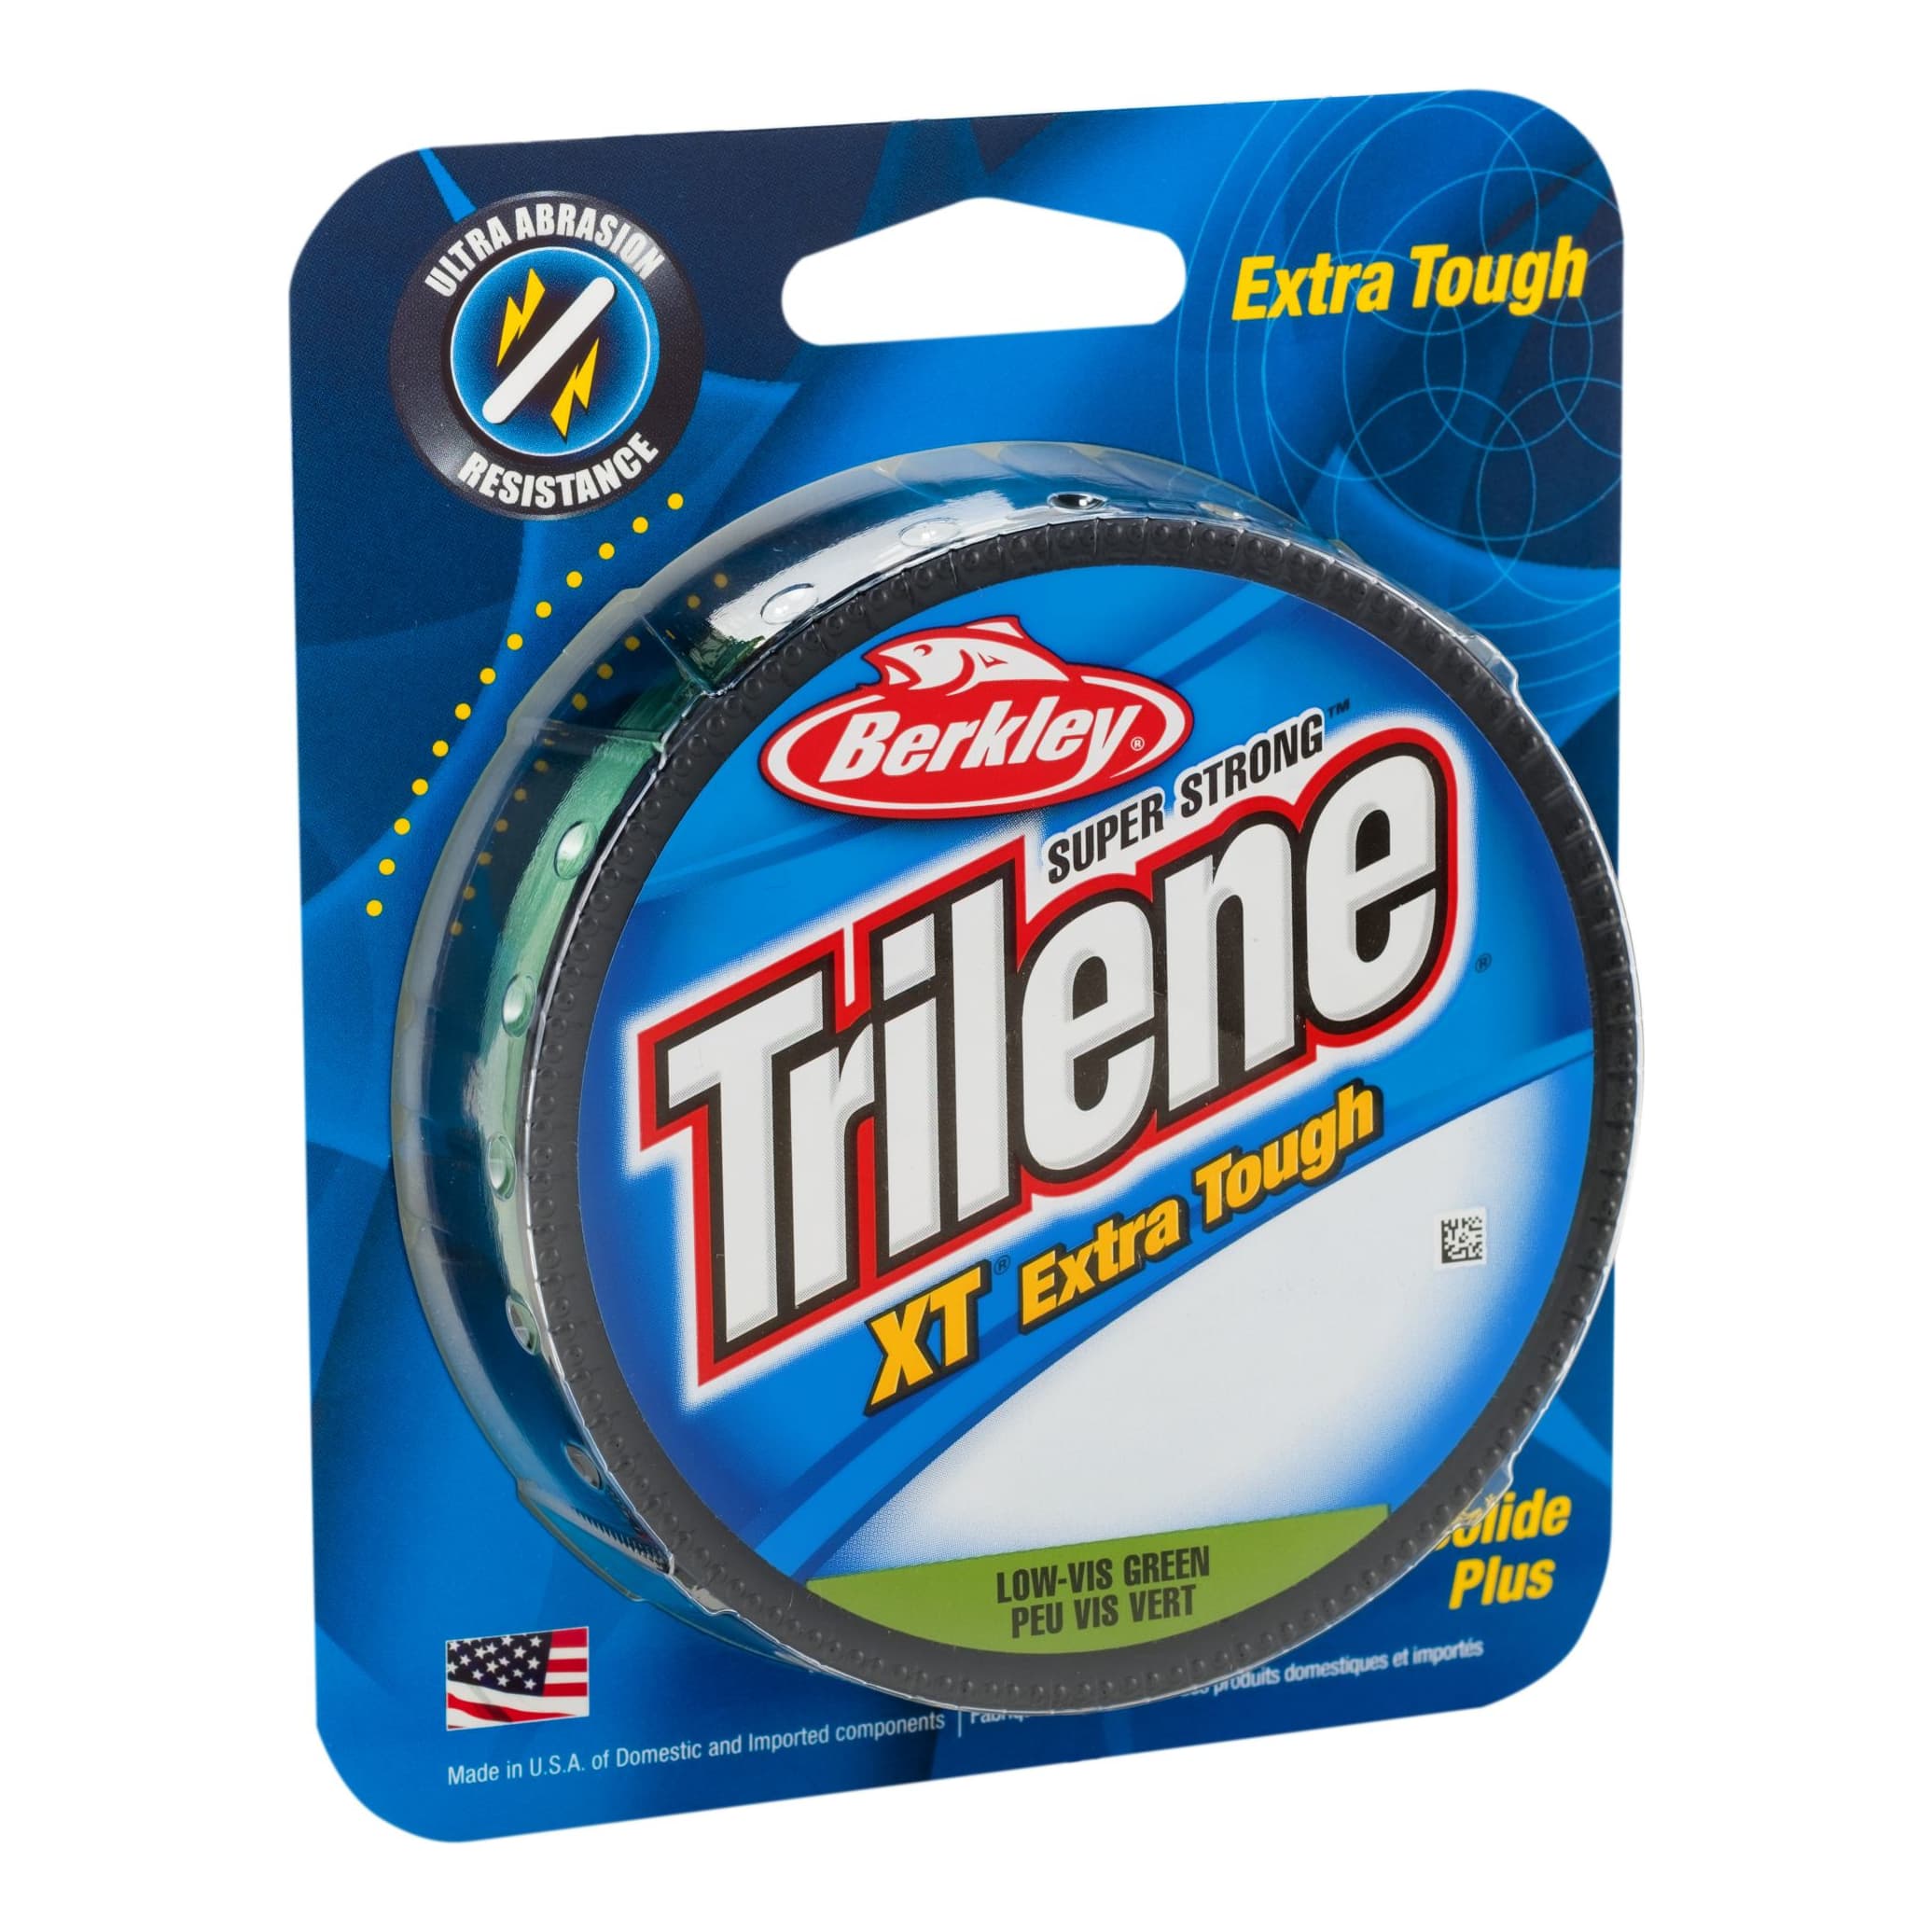 P-Line Floroclear 8# 300 Yard Spool • Find prices »